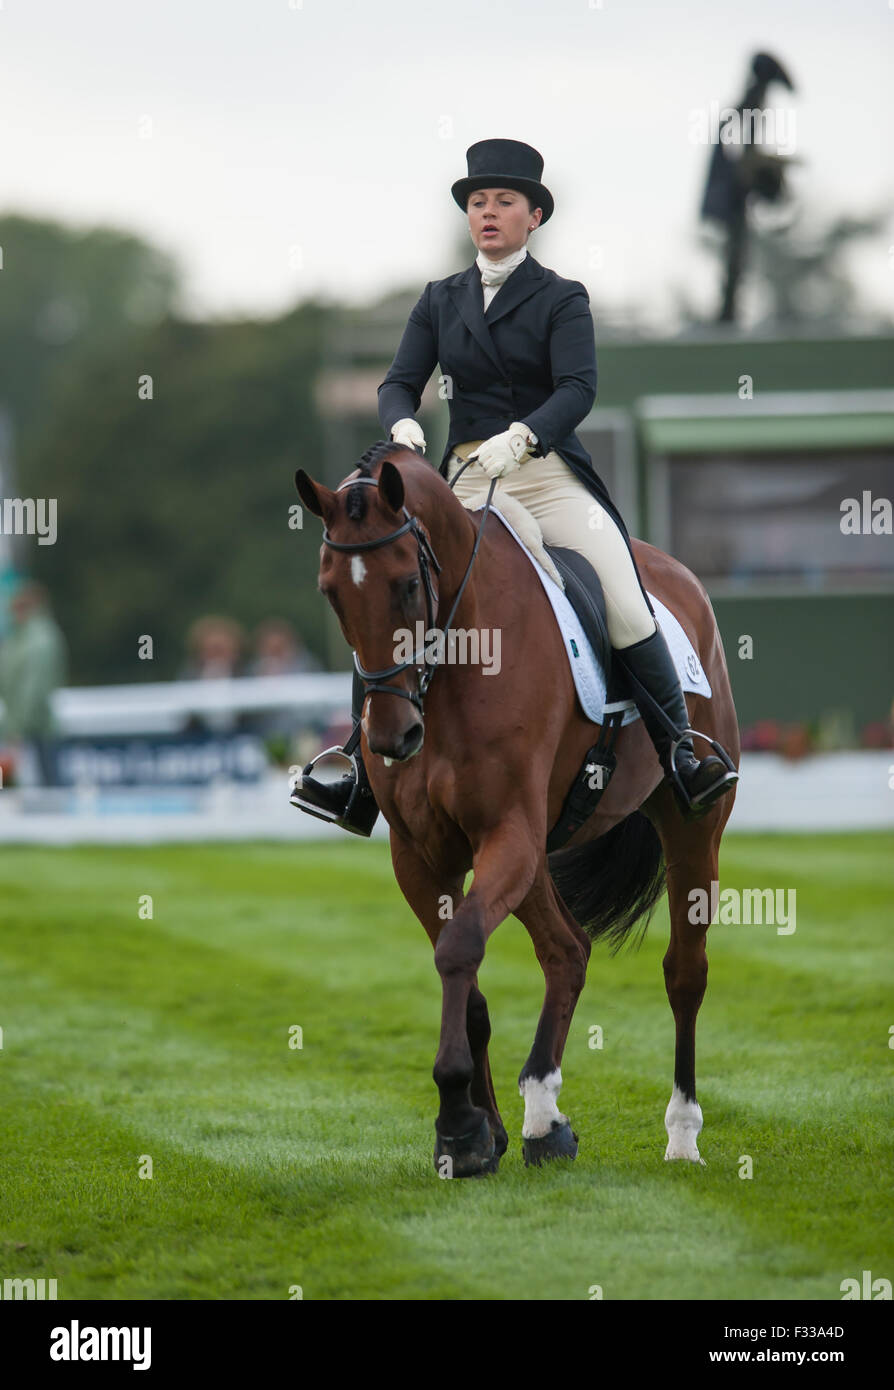 Alice Dunsdon and Fernhill Present - Burghley House, Stamford, UK - The Dressage phase,  Land Rover Burghley Horse Trials, 30th August 2012. Stock Photo